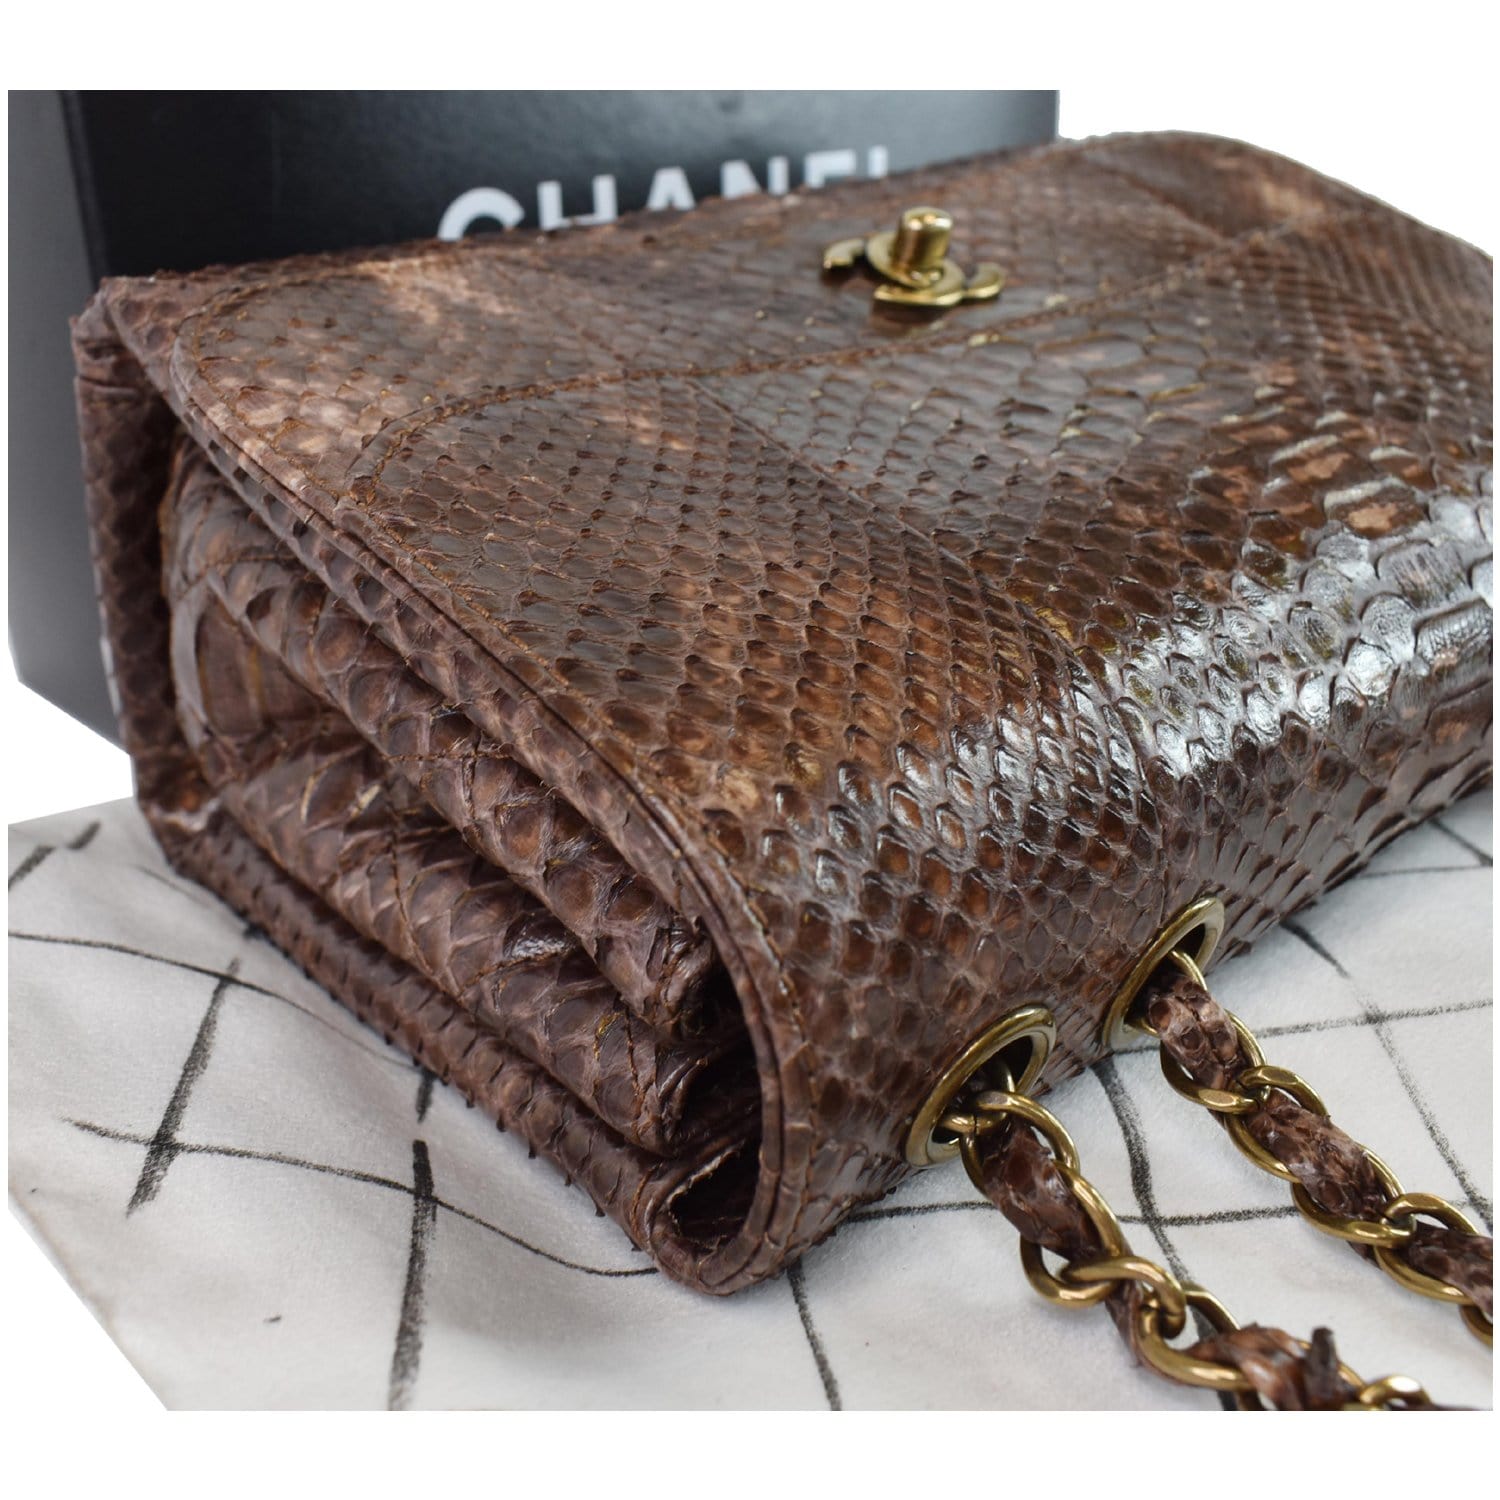 chanel brown flap